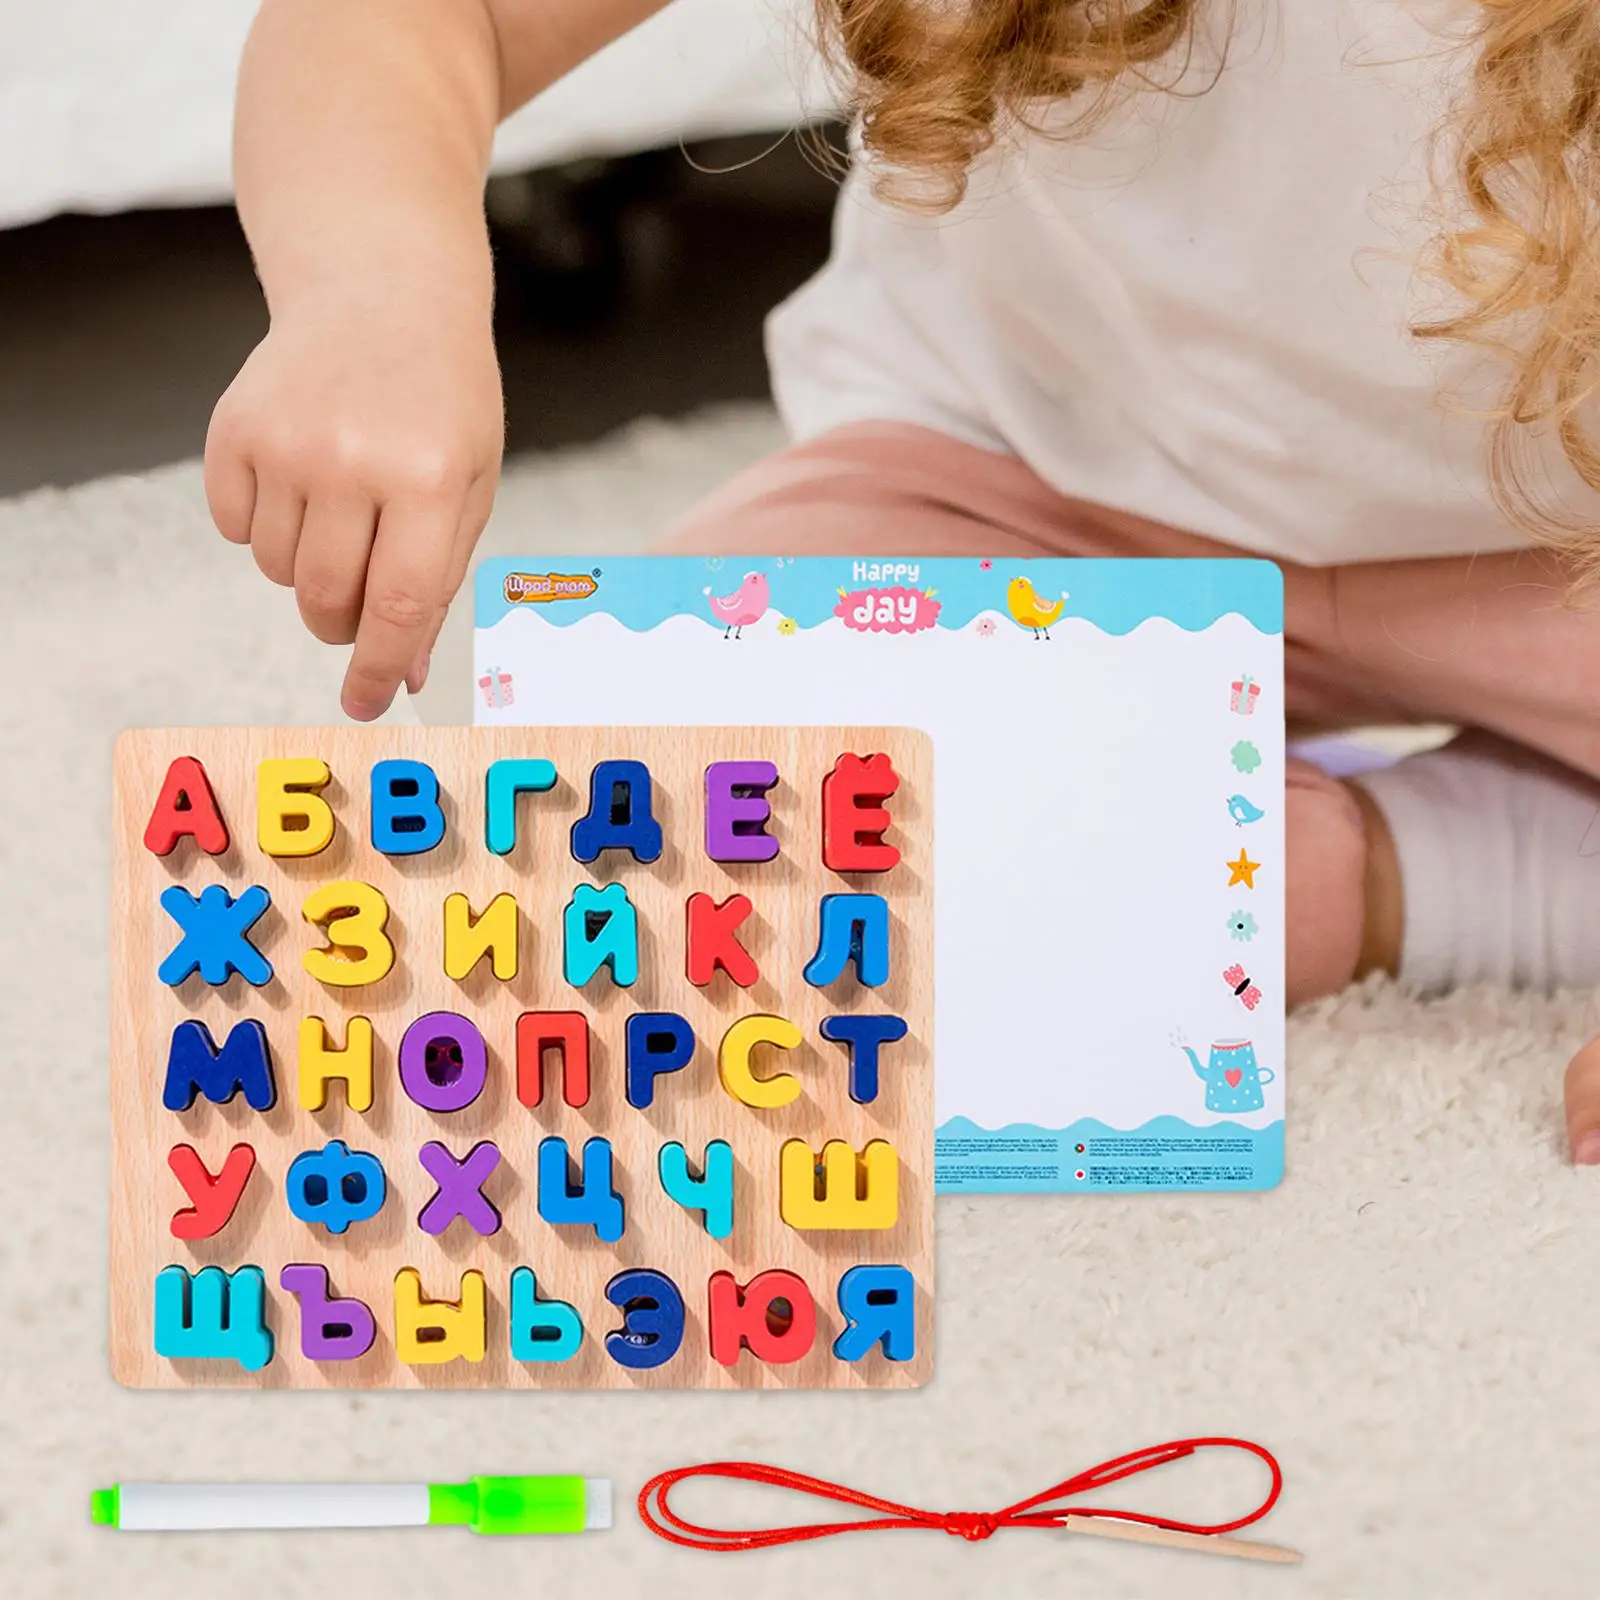 

Russian Blocks Jigsaw Montessori Preschool Toy Bright Colors for Children Kids Child Gifts Smooth Surface Spelling Letter Blocks